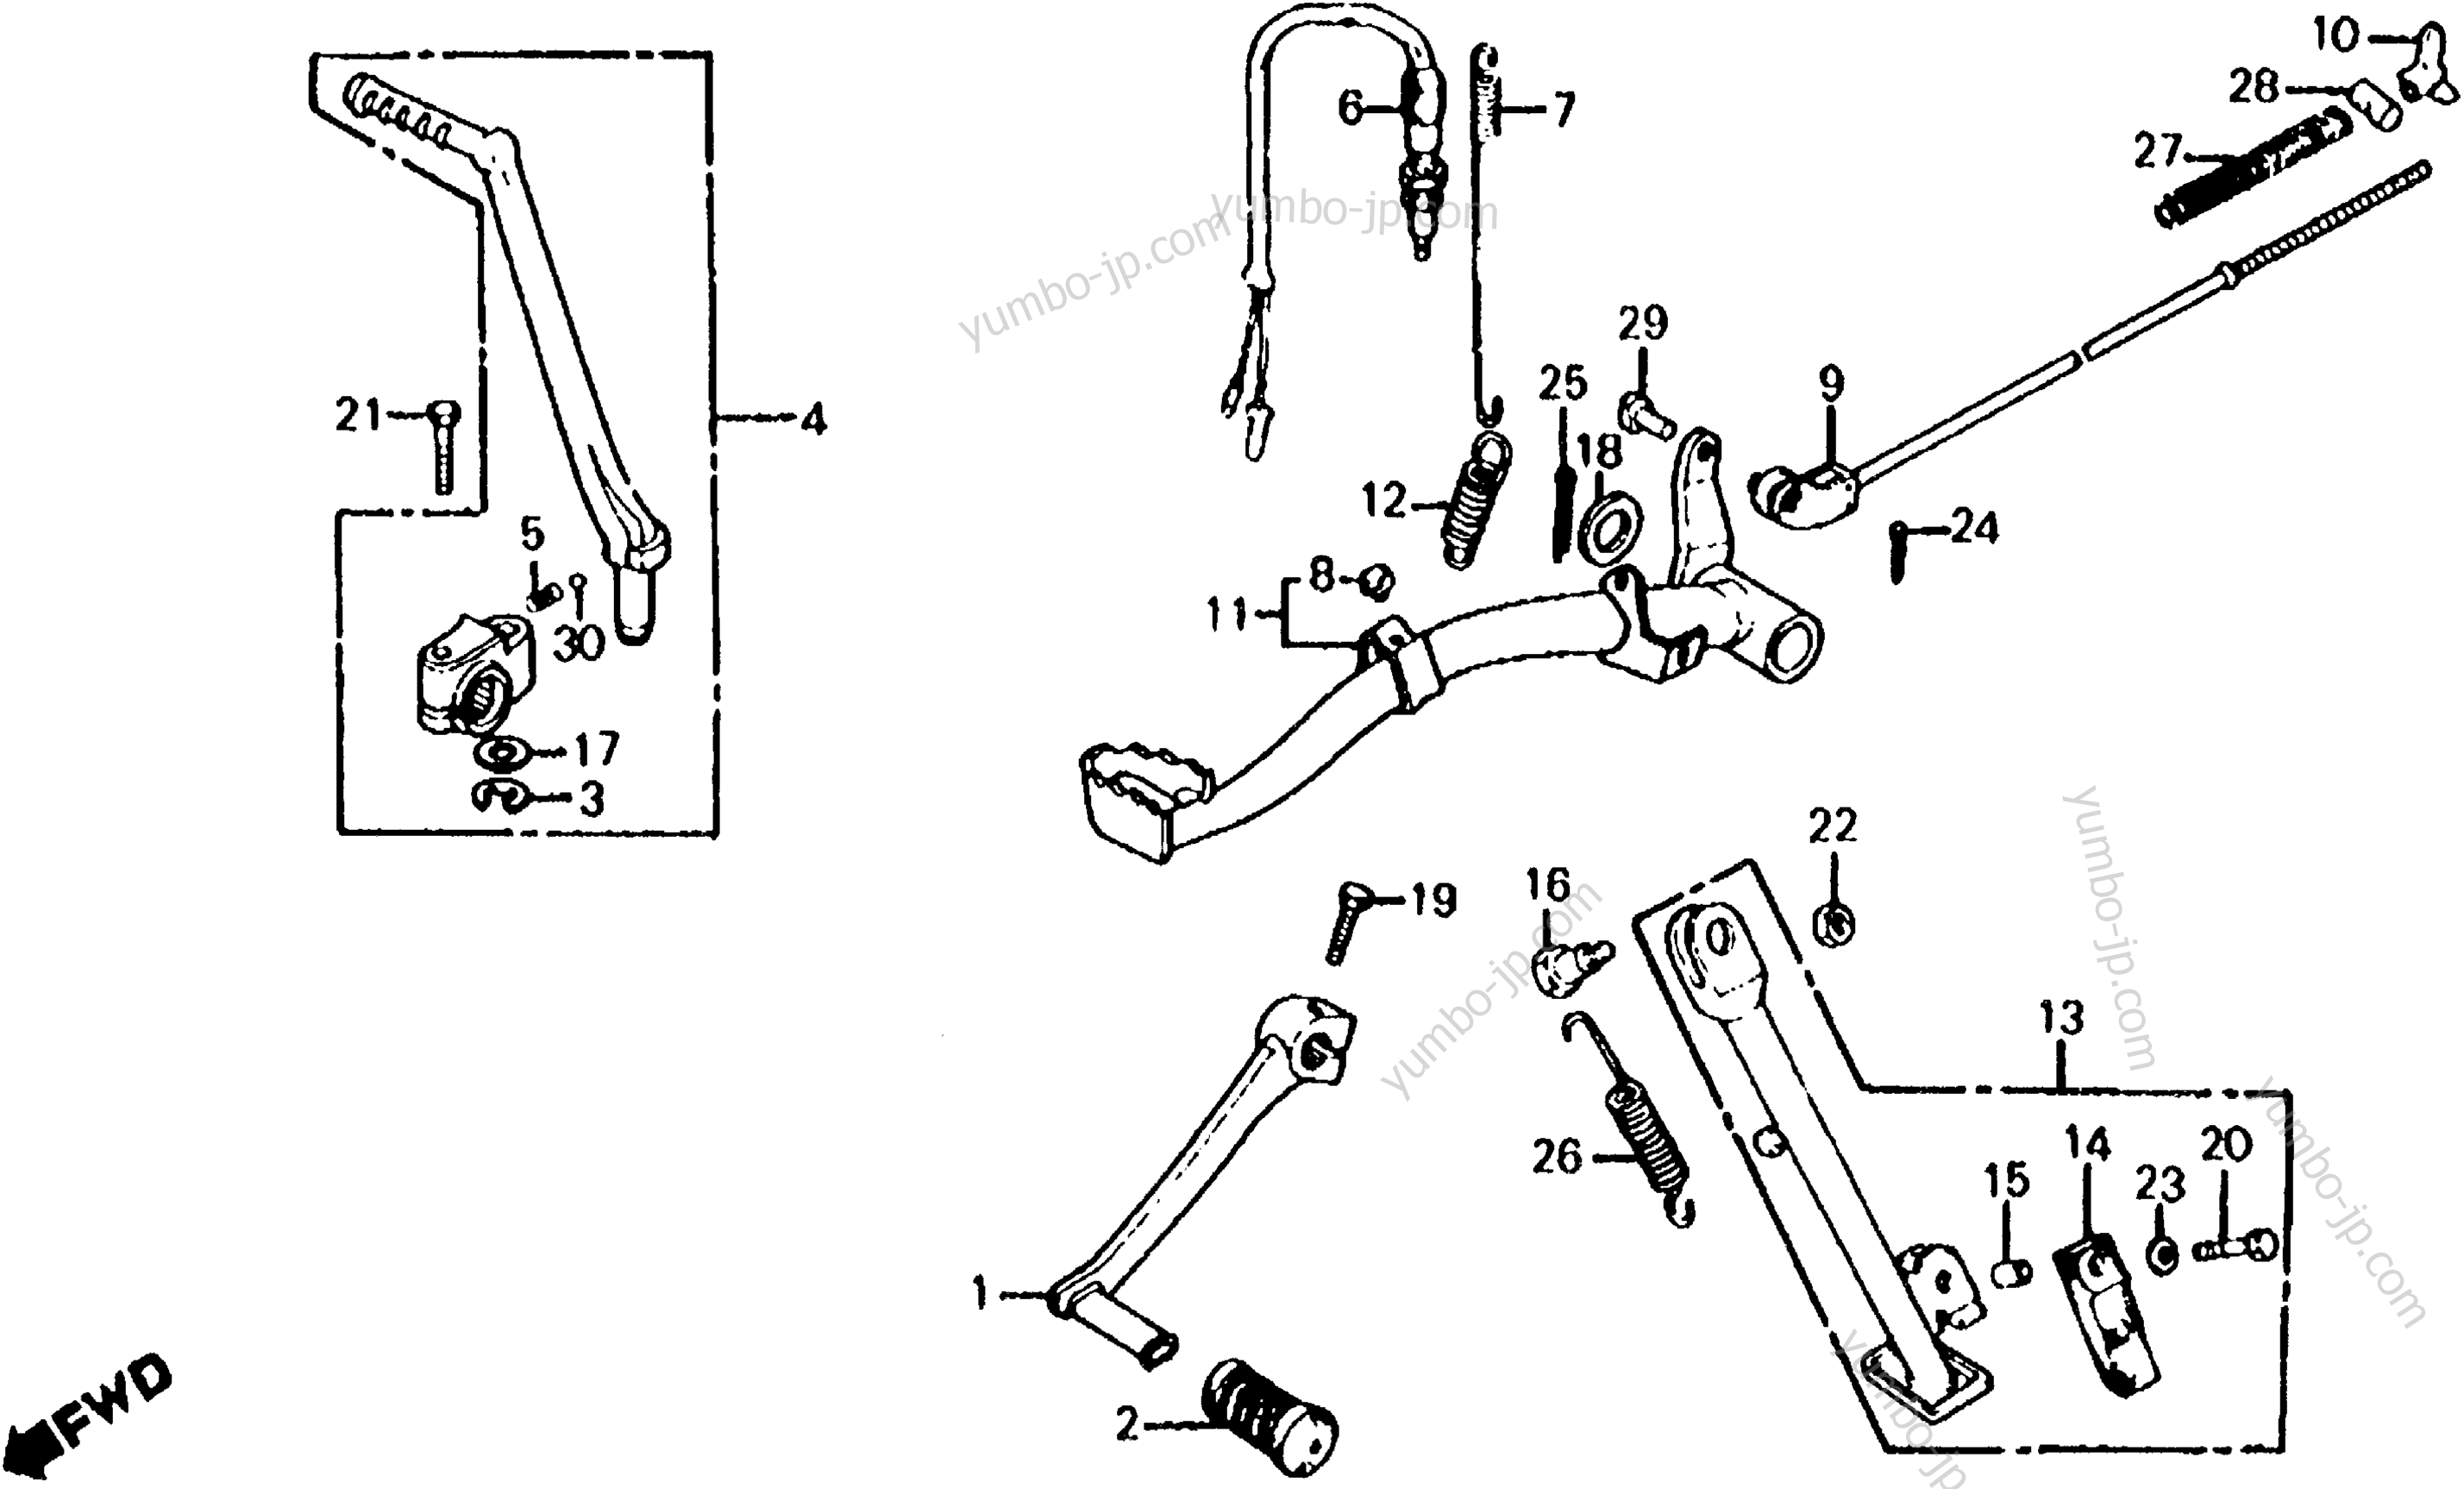 BRAKE PEDAL / GEARSHIFT PEDAL / KICK STARTER ARM for motorcycles HONDA XL100S A 1981 year